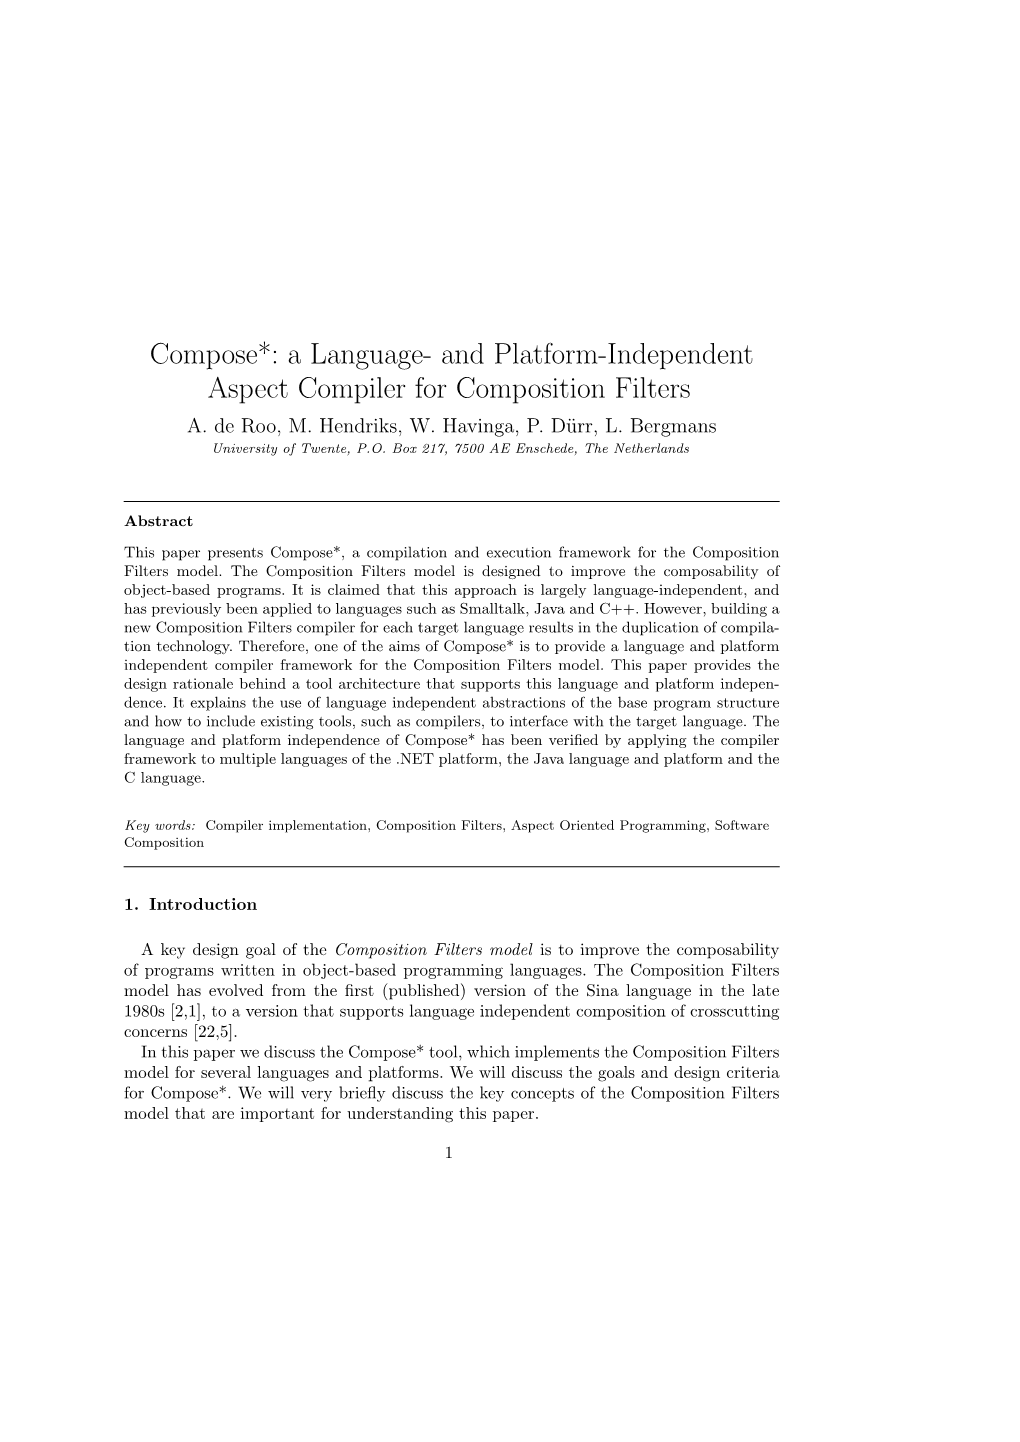 Compose*: a Language- and Platform-Independent Aspect Compiler for Composition Filters A